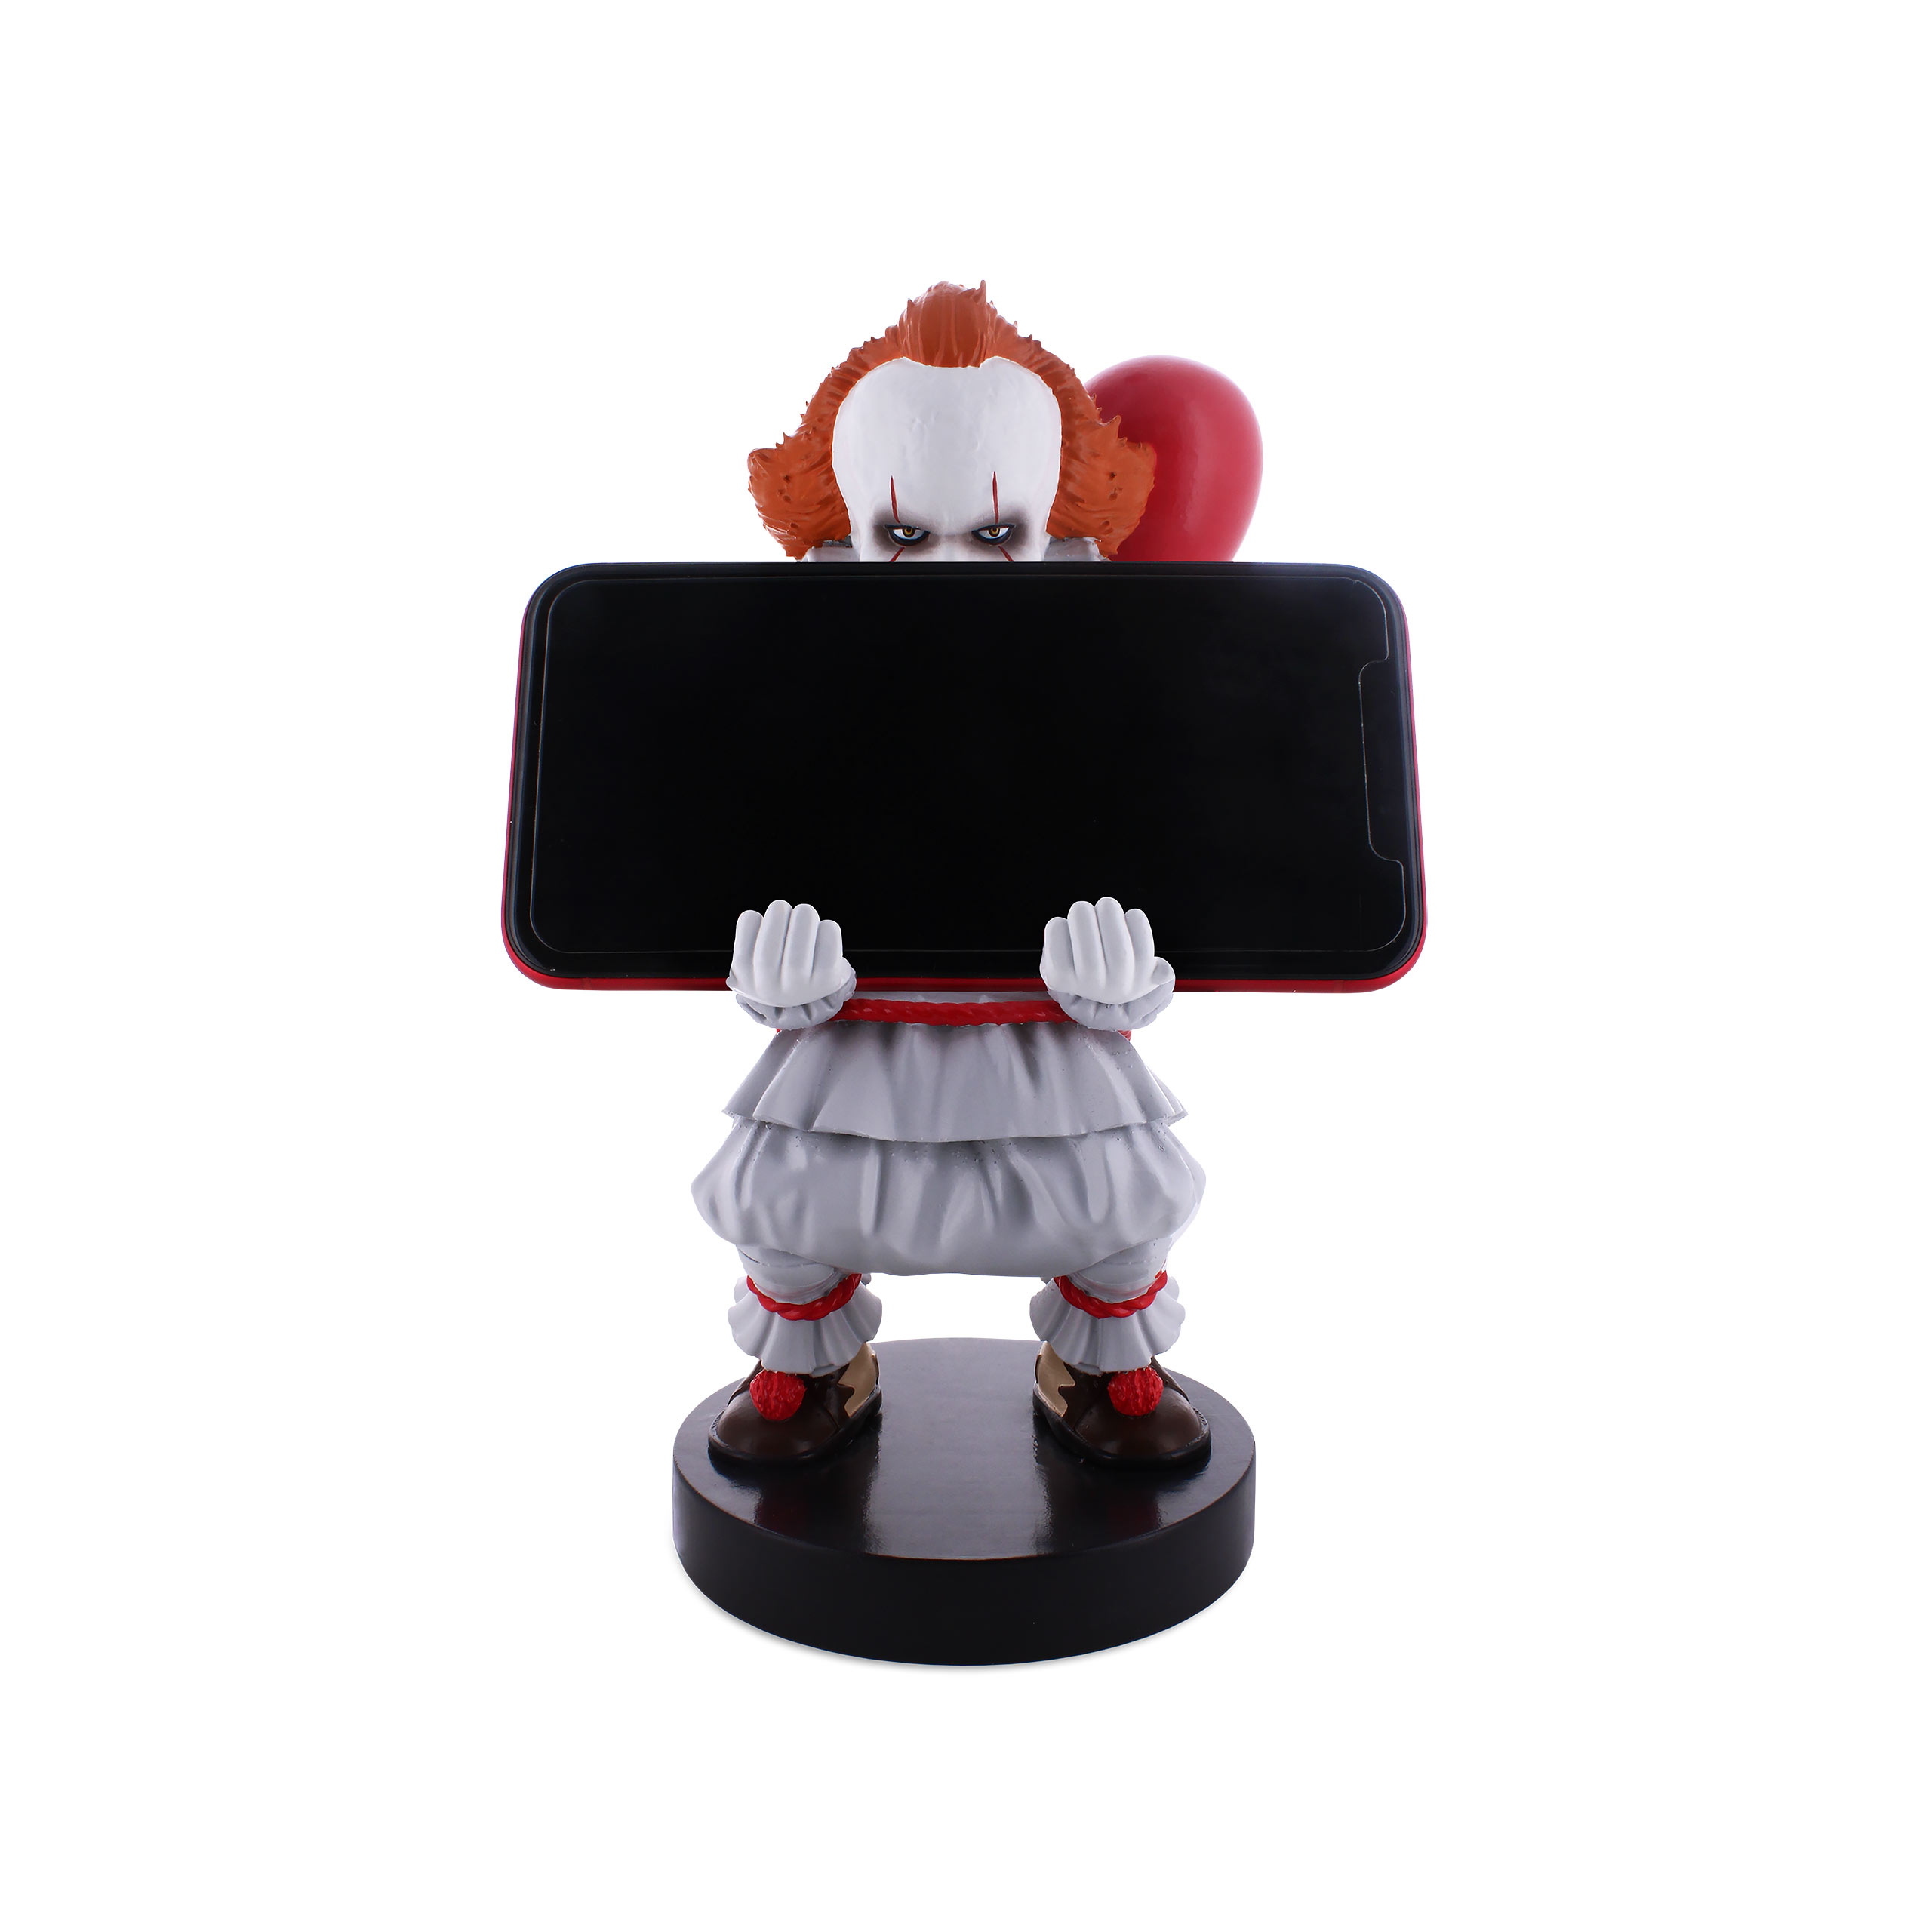 Stephen King's IT - Figurine Cable Guy Pennywise